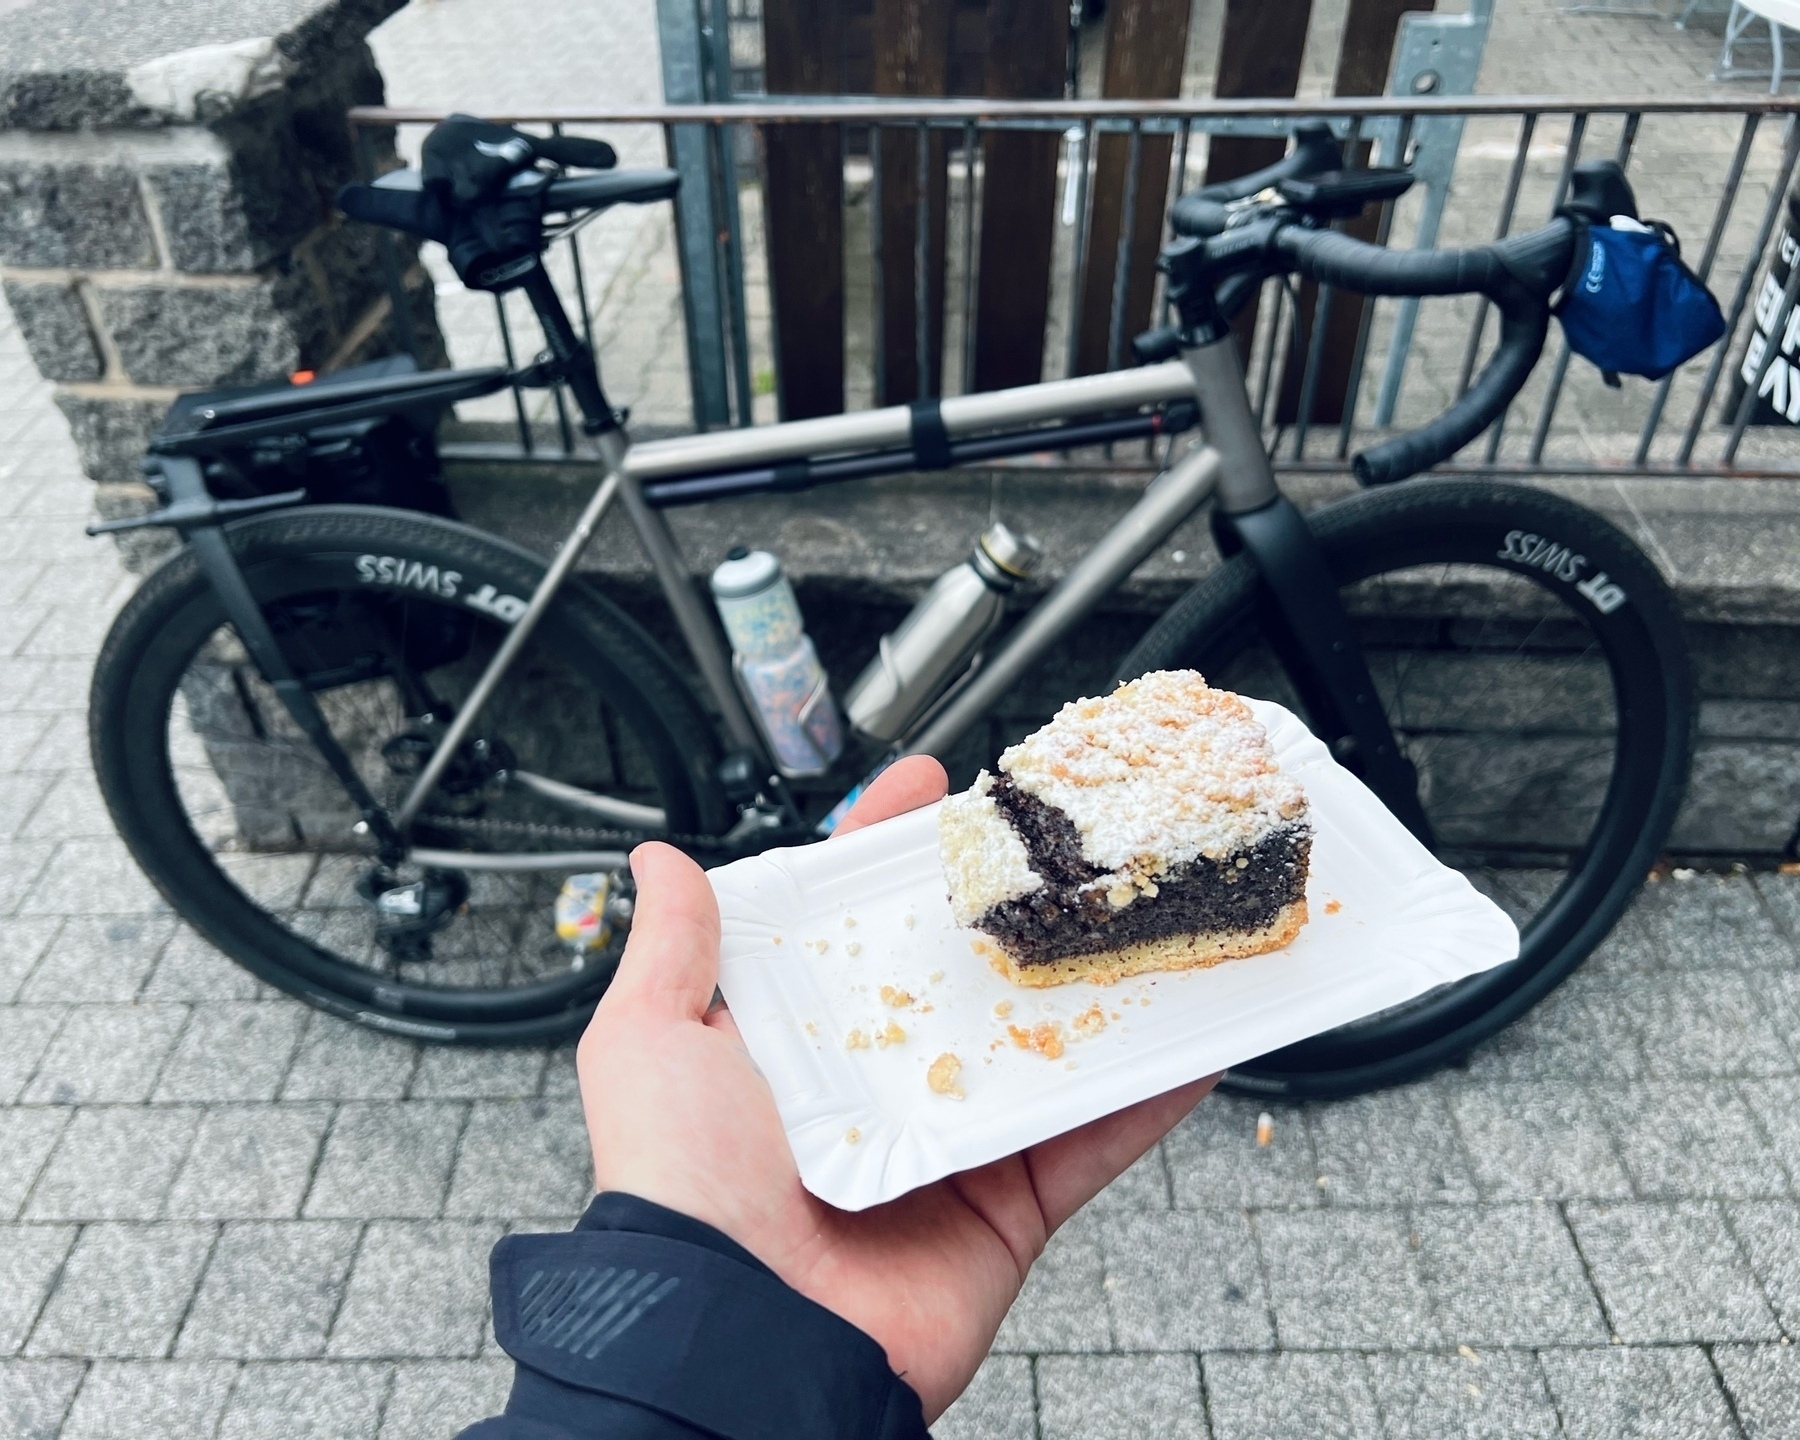 A piece of poppy seed cake ona rectangular paper plat held in the left hand of the photographer. in the background and slightly out of focus, a bike leans against a wall and fence. 